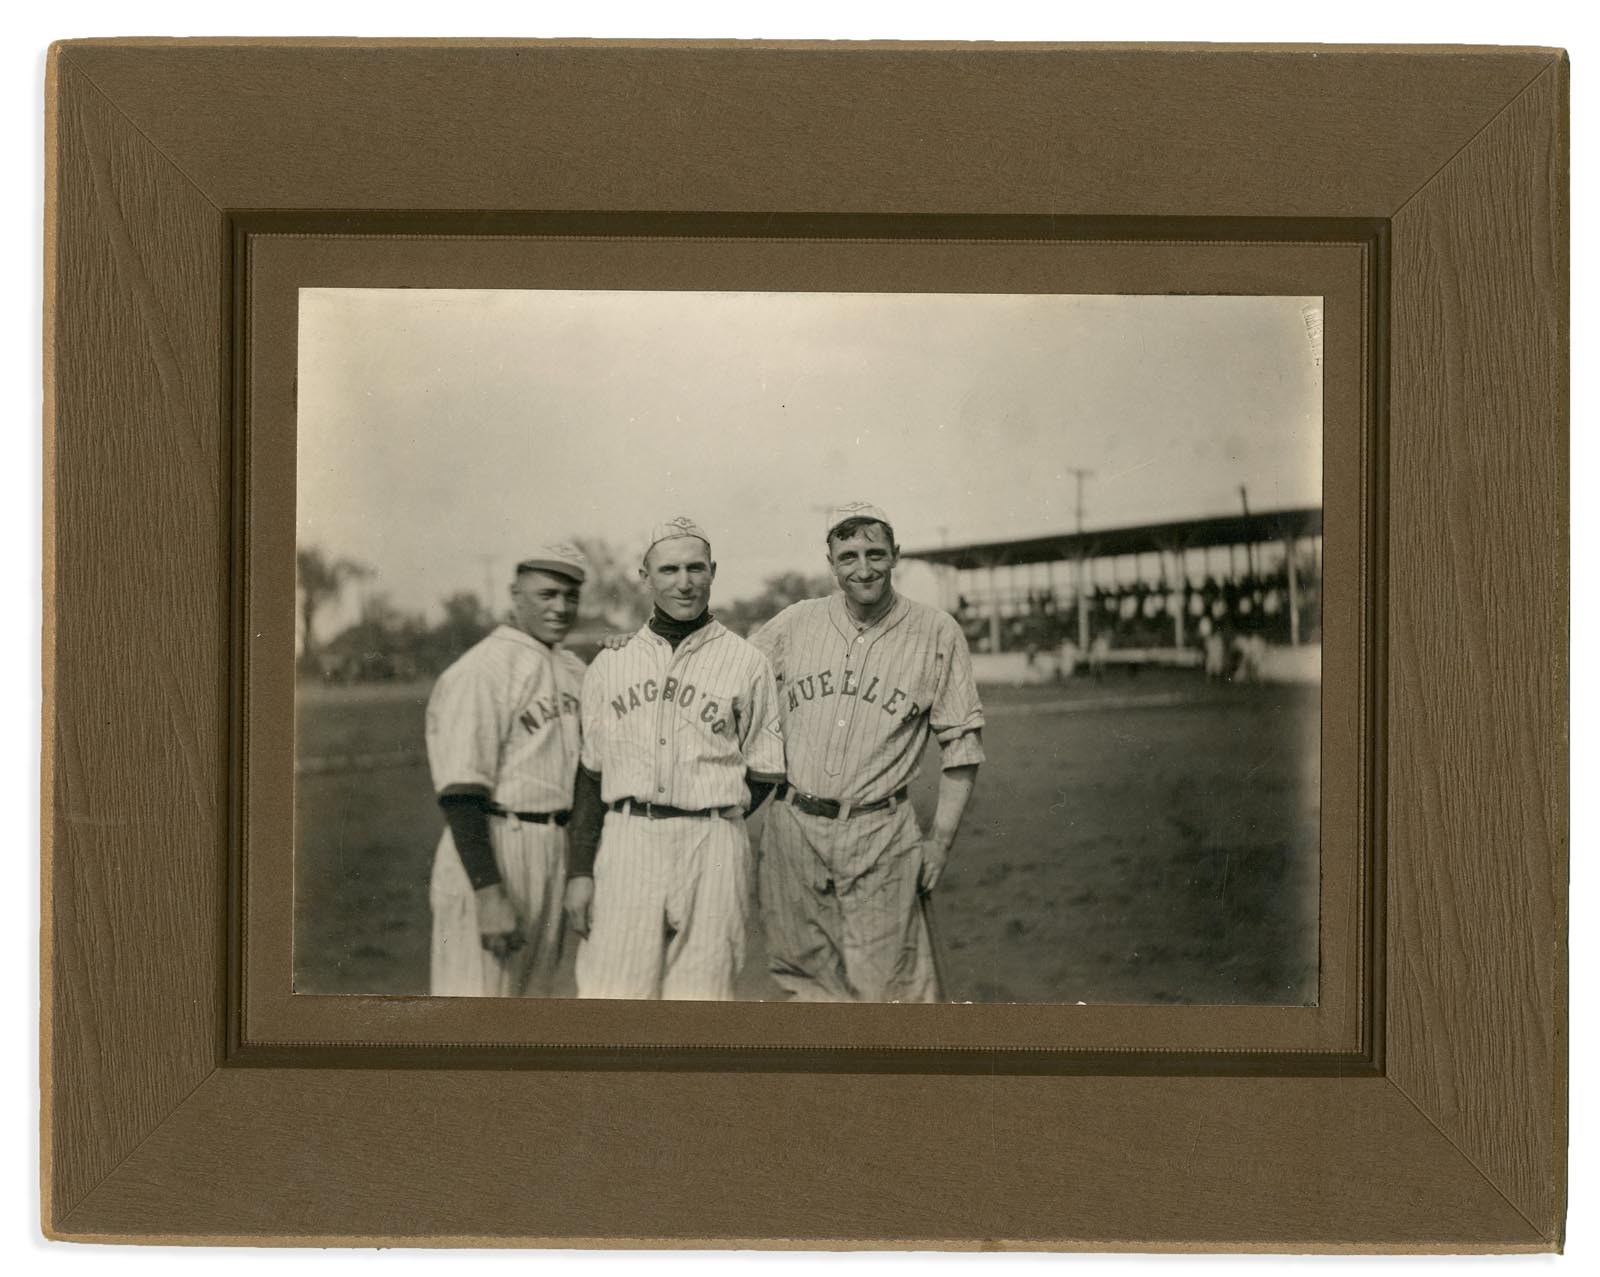 NY Yankees, Giants & Mets - 1920's A.E. Staley of Decator Staley's Photo of Dave Bancroft